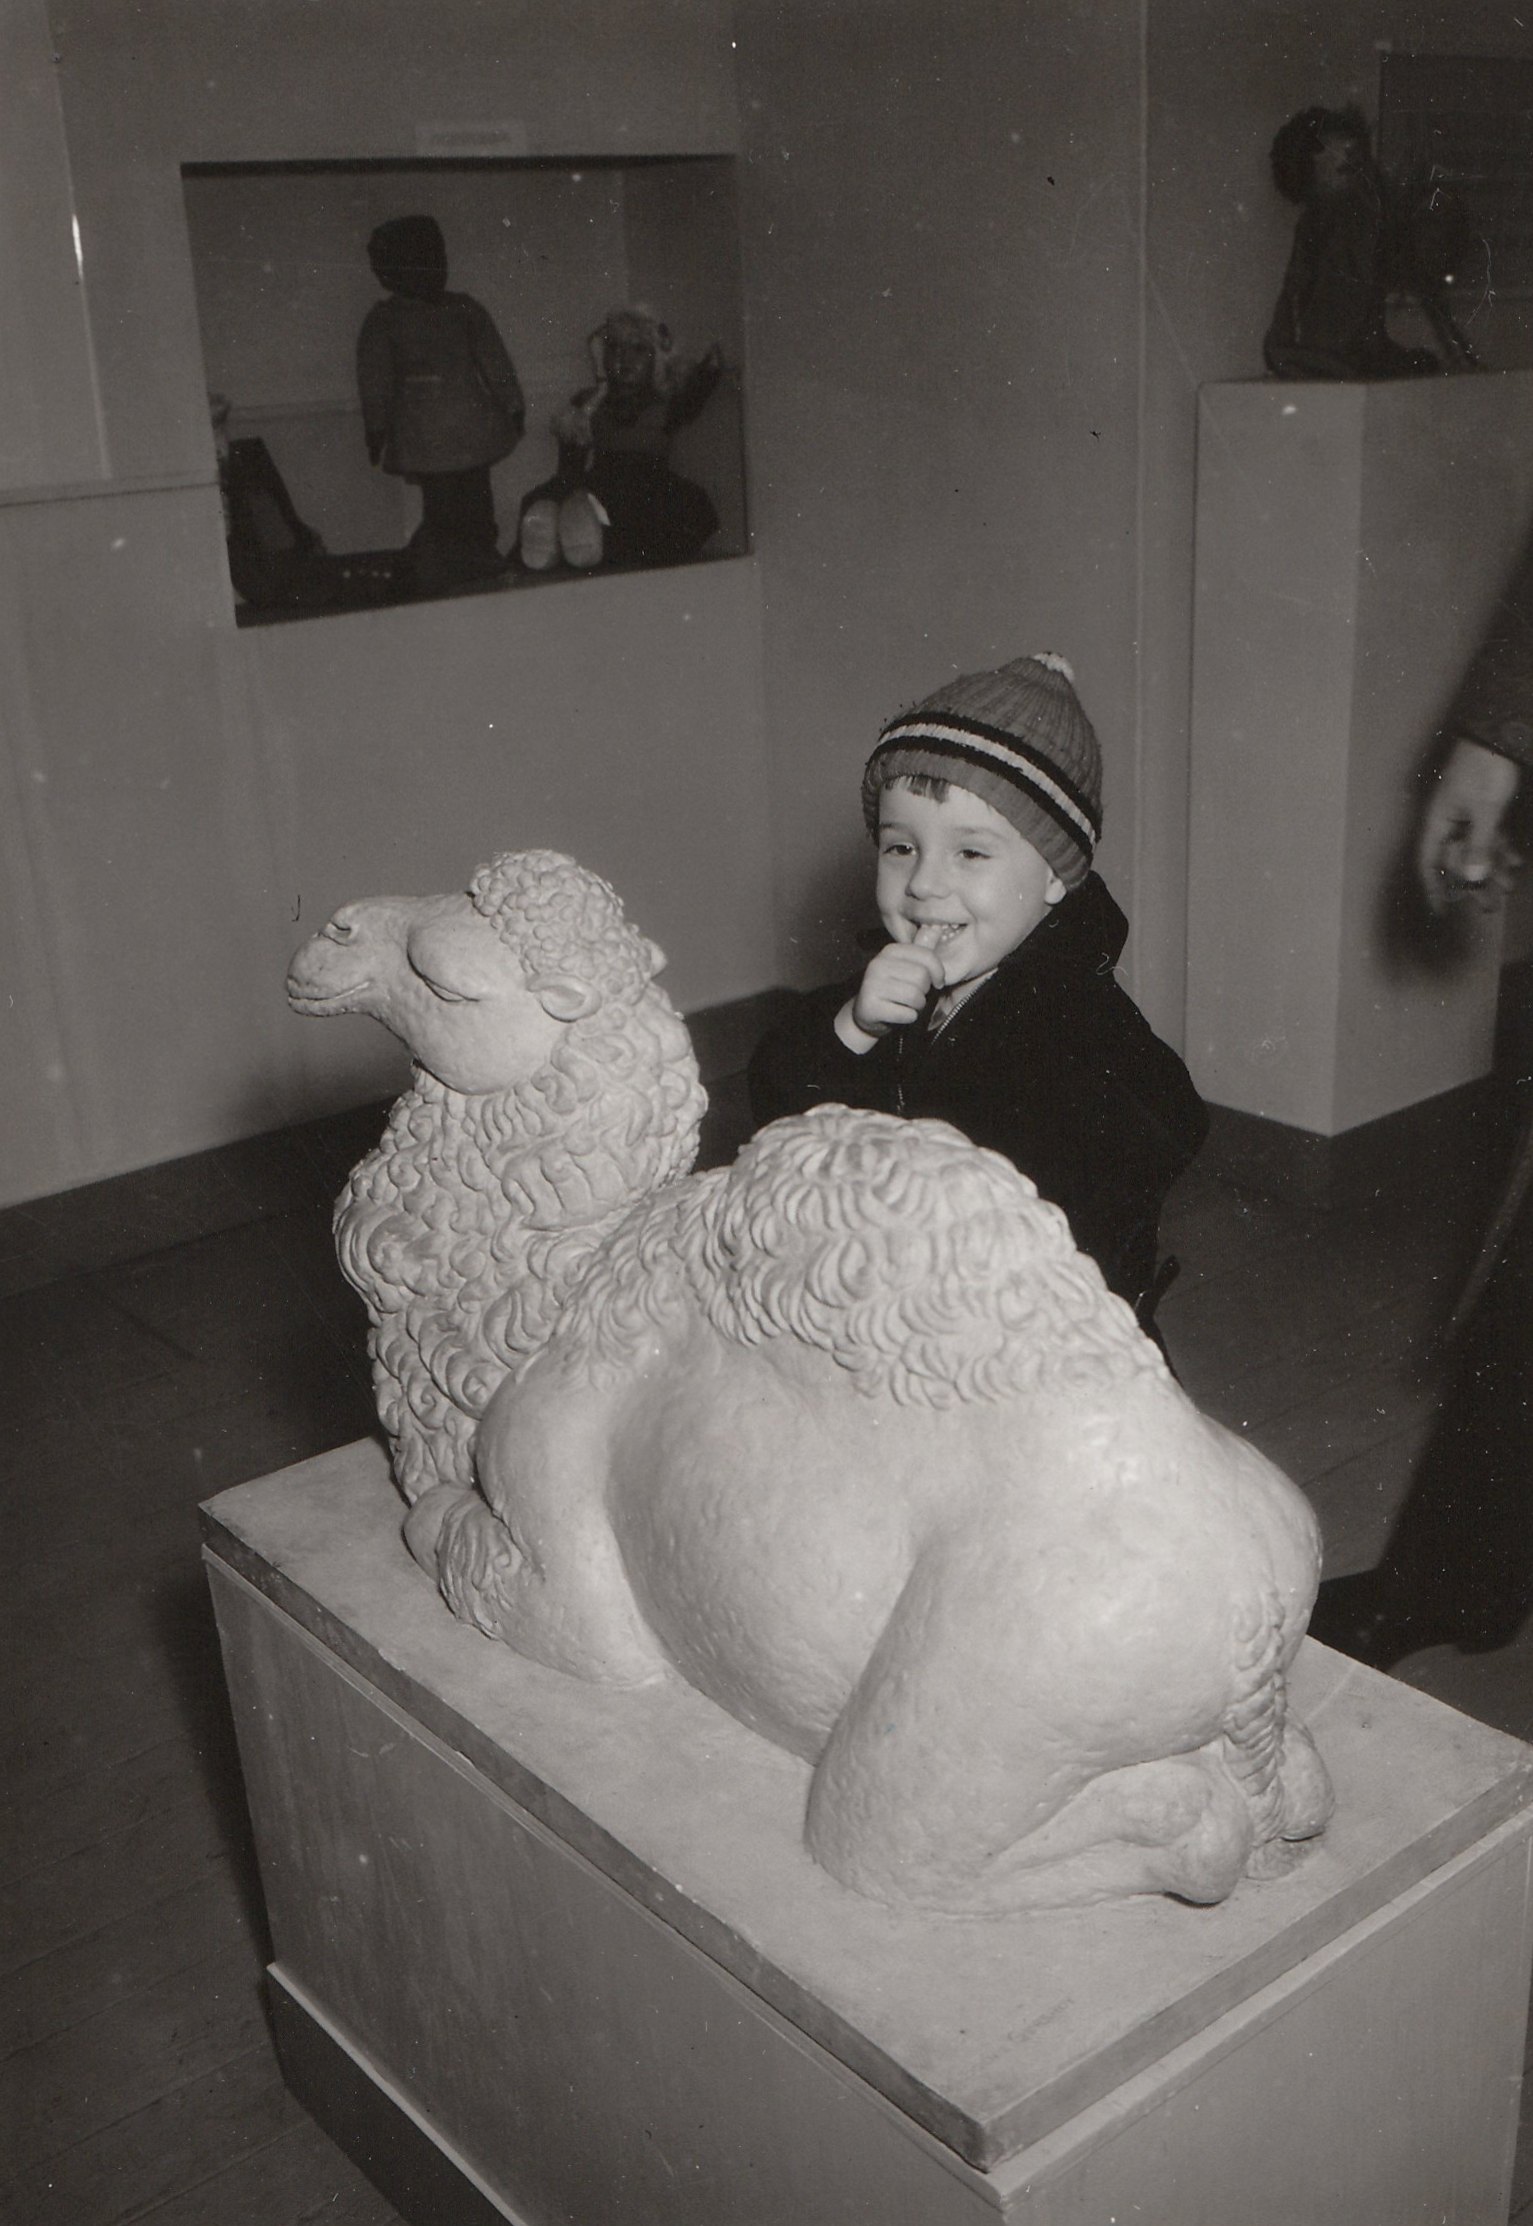 A young boy enjoys a children’s art exhibit in Washington, DC, sponsored by the Federal Art Project. Photo courtesy of the National Archives (January 1938).